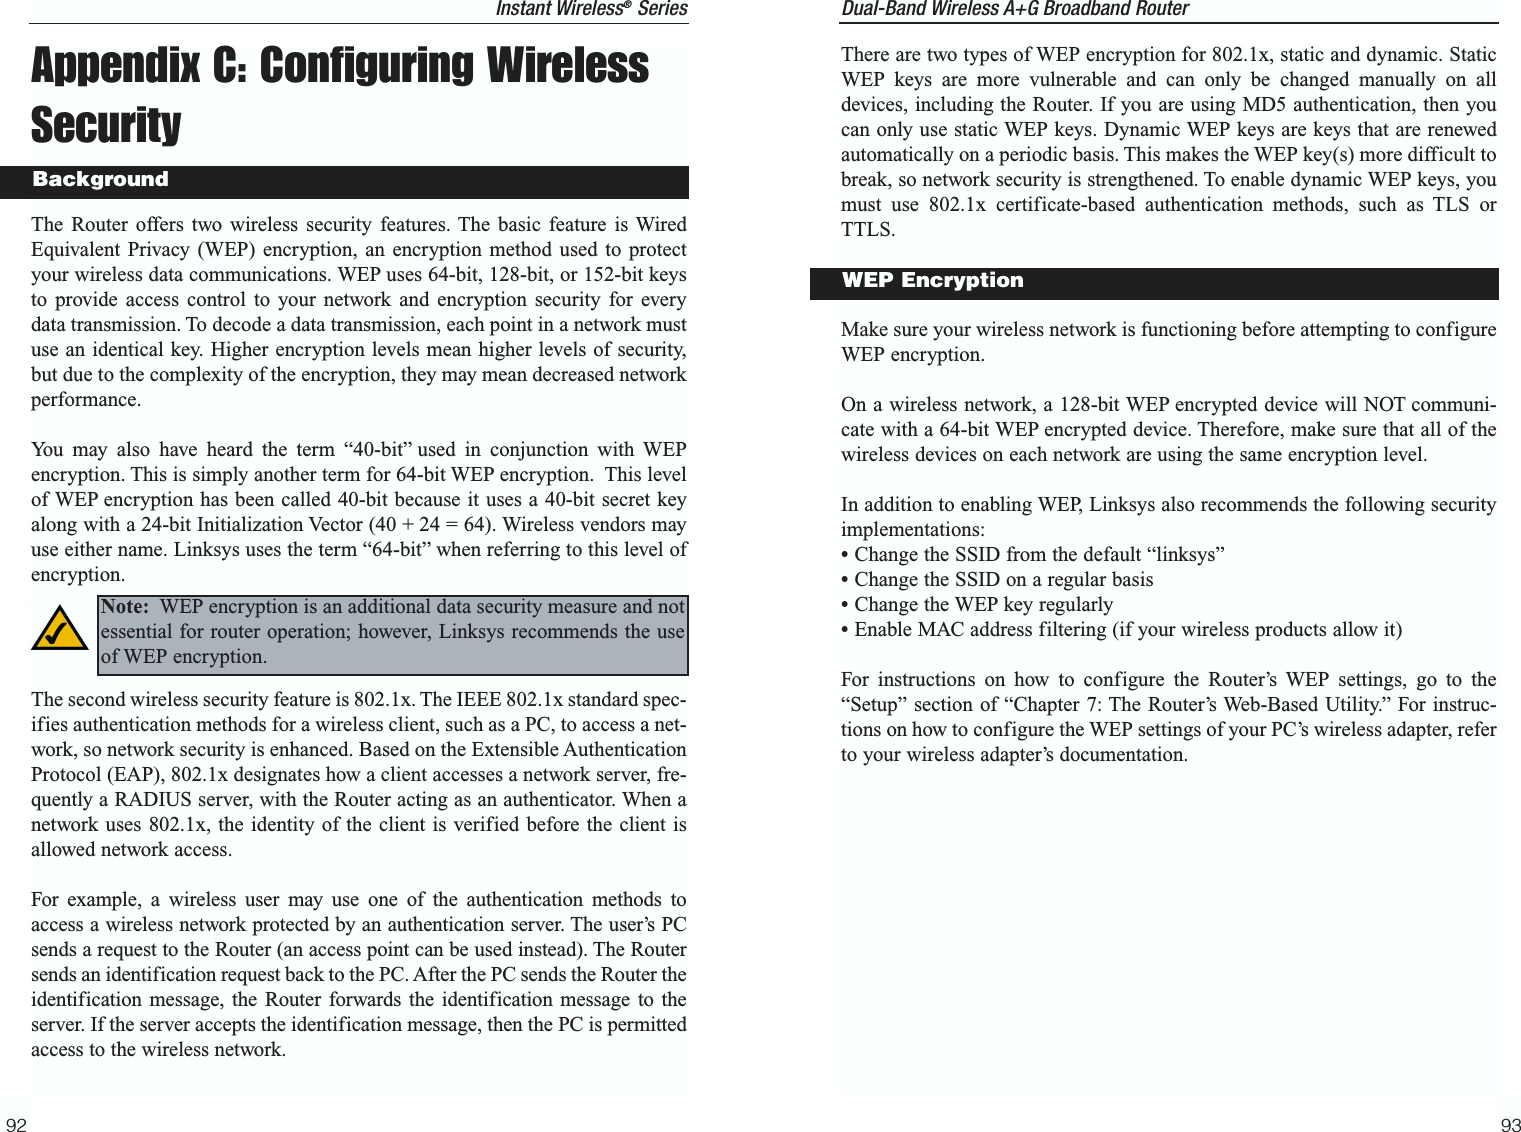 Dual-Band Wireless A+G Broadband Router 9392There are two types of WEP encryption for 802.1x, static and dynamic. StaticWEP keys are more vulnerable and can only be changed manually on alldevices, including the Router. If you are using MD5 authentication, then youcan only use static WEP keys. Dynamic WEP keys are keys that are renewedautomatically on a periodic basis. This makes the WEP key(s) more difficult tobreak, so network security is strengthened. To enable dynamic WEP keys, youmust use 802.1x certificate-based authentication methods, such as TLS orTTLS.Make sure your wireless network is functioning before attempting to configureWEP encryption.On a wireless network, a 128-bit WEP encrypted device will NOT communi-cate with a 64-bit WEP encrypted device. Therefore, make sure that all of thewireless devices on each network are using the same encryption level. In addition to enabling WEP, Linksys also recommends the following securityimplementations:•Change the SSID from the default “linksys”•Change the SSID on a regular basis•Change the WEP key regularly•Enable MAC address filtering (if your wireless products allow it)For instructions on how to configure the Router’s WEP settings, go to the“Setup” section of “Chapter 7: The Router’s Web-Based Utility.” For instruc-tions on how to configure the WEP settings of your PC’s wireless adapter, referto your wireless adapter’s documentation.WEP EncryptionInstant Wireless®SeriesAppendix C: Configuring WirelessSecurityThe Router offers two wireless security features. The basic feature is WiredEquivalent Privacy (WEP) encryption, an encryption method used to protectyour wireless data communications. WEP uses 64-bit, 128-bit, or 152-bit keysto provide access control to your network and encryption security for everydata transmission. To decode a data transmission, each point in a network mustuse an identical key. Higher encryption levels mean higher levels of security,but due to the complexity of the encryption, they may mean decreased networkperformance.You may also have heard the term “40-bit” used in conjunction with WEPencryption. This is simply another term for 64-bit WEP encryption.  This levelof WEP encryption has been called 40-bit because it uses a 40-bit secret keyalong with a 24-bit Initialization Vector (40 + 24 = 64). Wireless vendors mayuse either name. Linksys uses the term “64-bit” when referring to this level ofencryption.The second wireless security feature is 802.1x. The IEEE 802.1x standard spec-ifies authentication methods for a wireless client, such as a PC, to access a net-work, so network security is enhanced. Based on the Extensible AuthenticationProtocol (EAP), 802.1x designates how a client accesses a network server, fre-quently a RADIUS server, with the Router acting as an authenticator. When anetwork uses 802.1x, the identity of the client is verified before the client isallowed network access. For example, a wireless user may use one of the authentication methods toaccess a wireless network protected by an authentication server. The user’s PCsends a request to the Router (an access point can be used instead). The Routersends an identification request back to the PC. After the PC sends the Router theidentification message, the Router forwards the identification message to theserver. If the server accepts the identification message, then the PC is permittedaccess to the wireless network.BackgroundNote: WEP encryption is an additional data security measure and notessential for router operation; however, Linksys recommends the useof WEP encryption.  